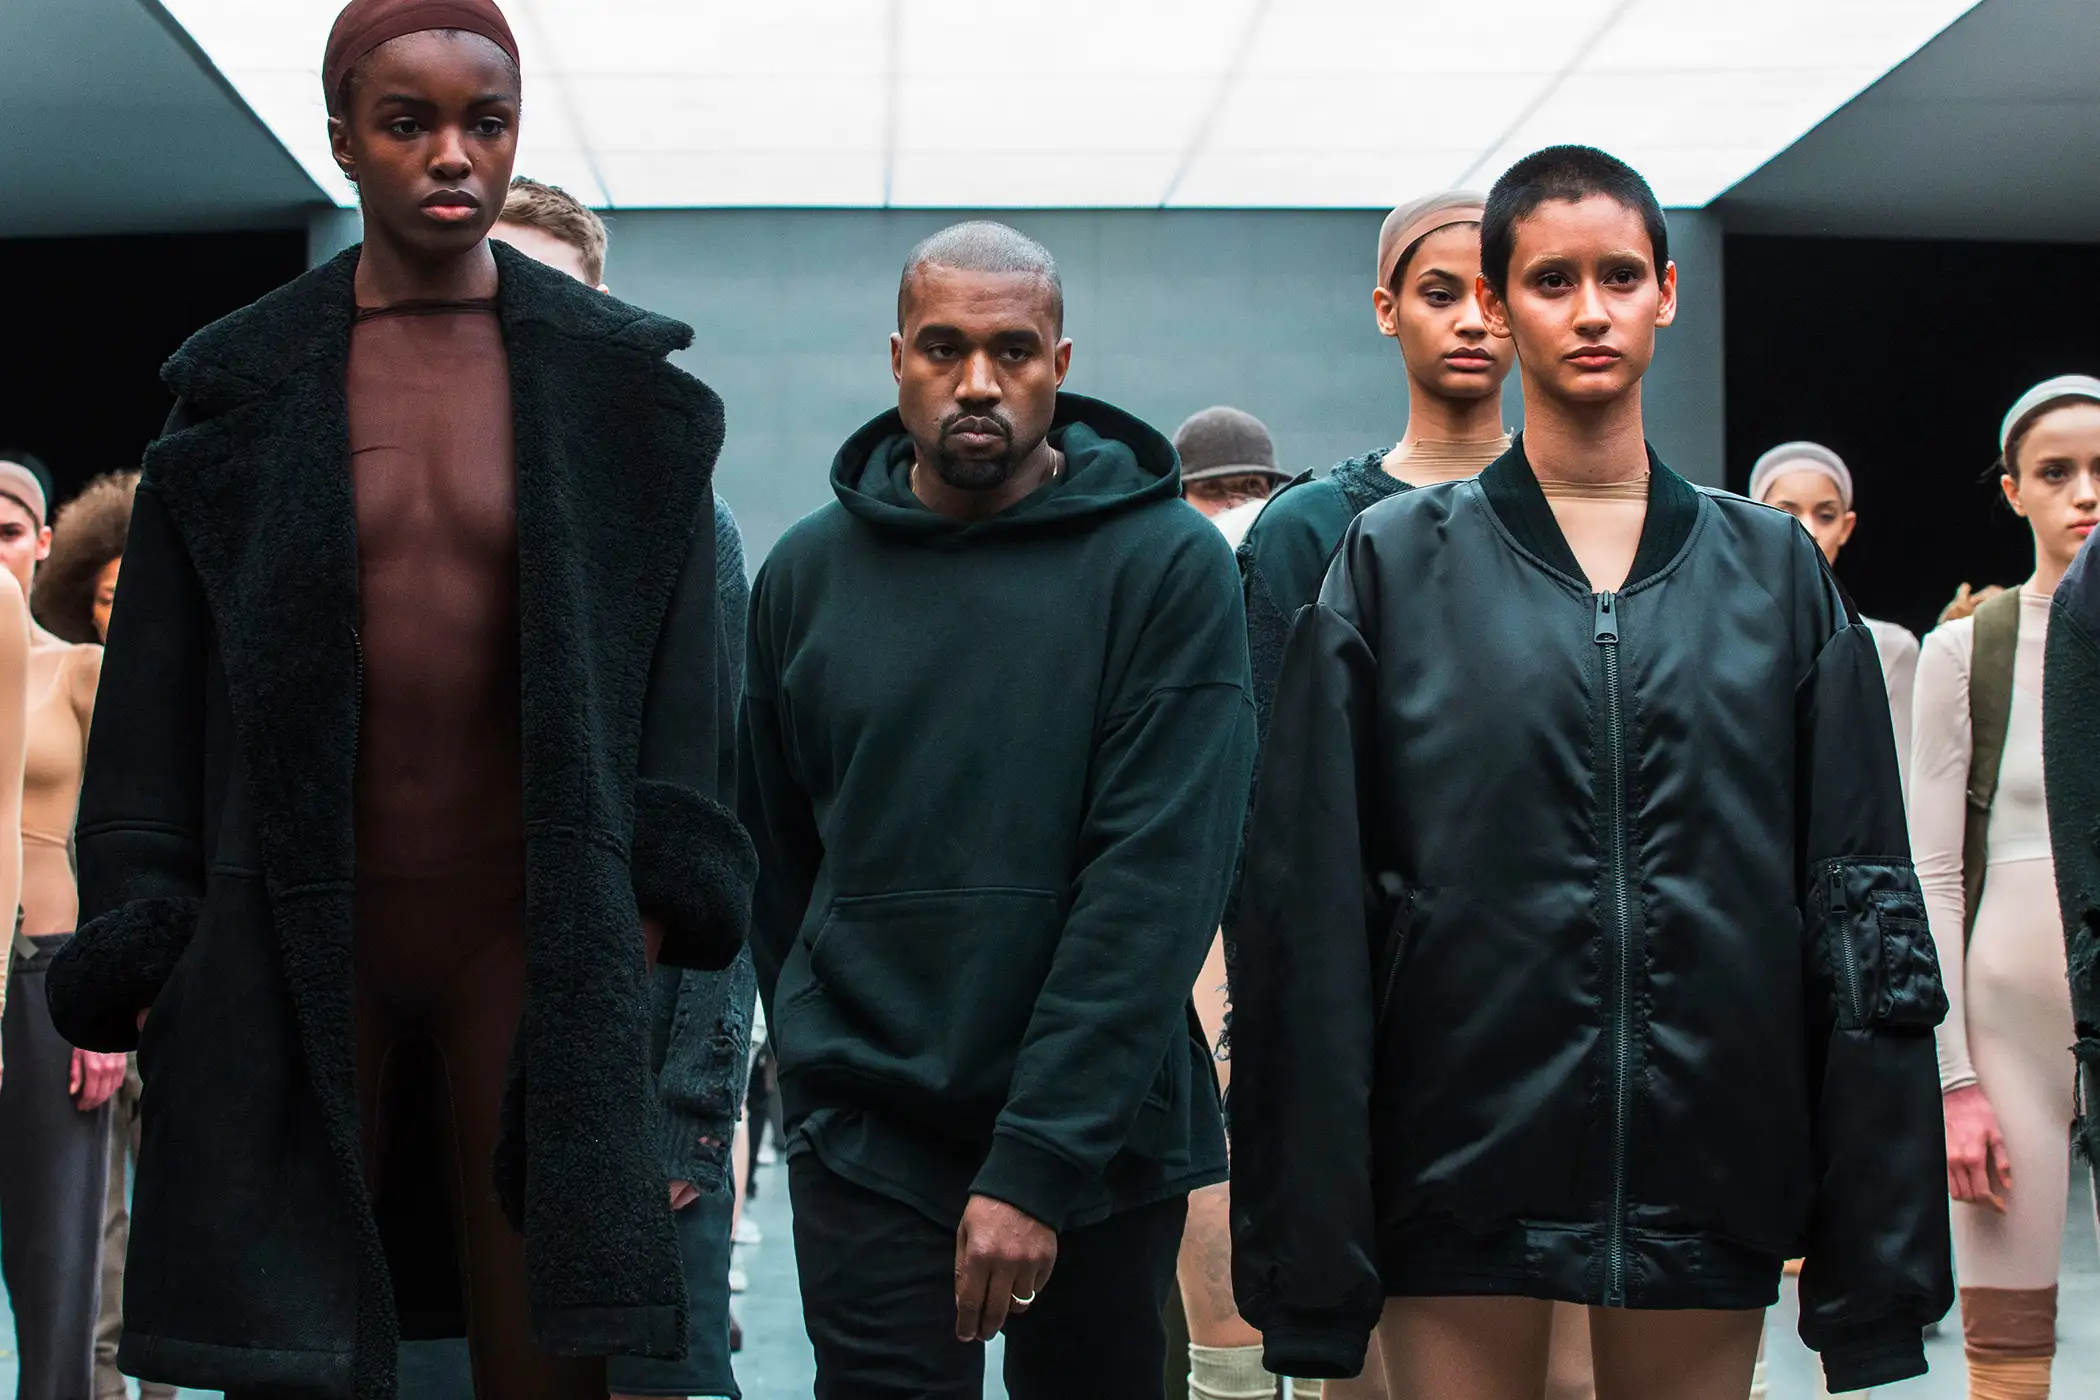 Singer Kanye West walks past models after presenting his Fall/Winter 2015 partnership line with Adidas at New York Fashion Week February 12, 2015.